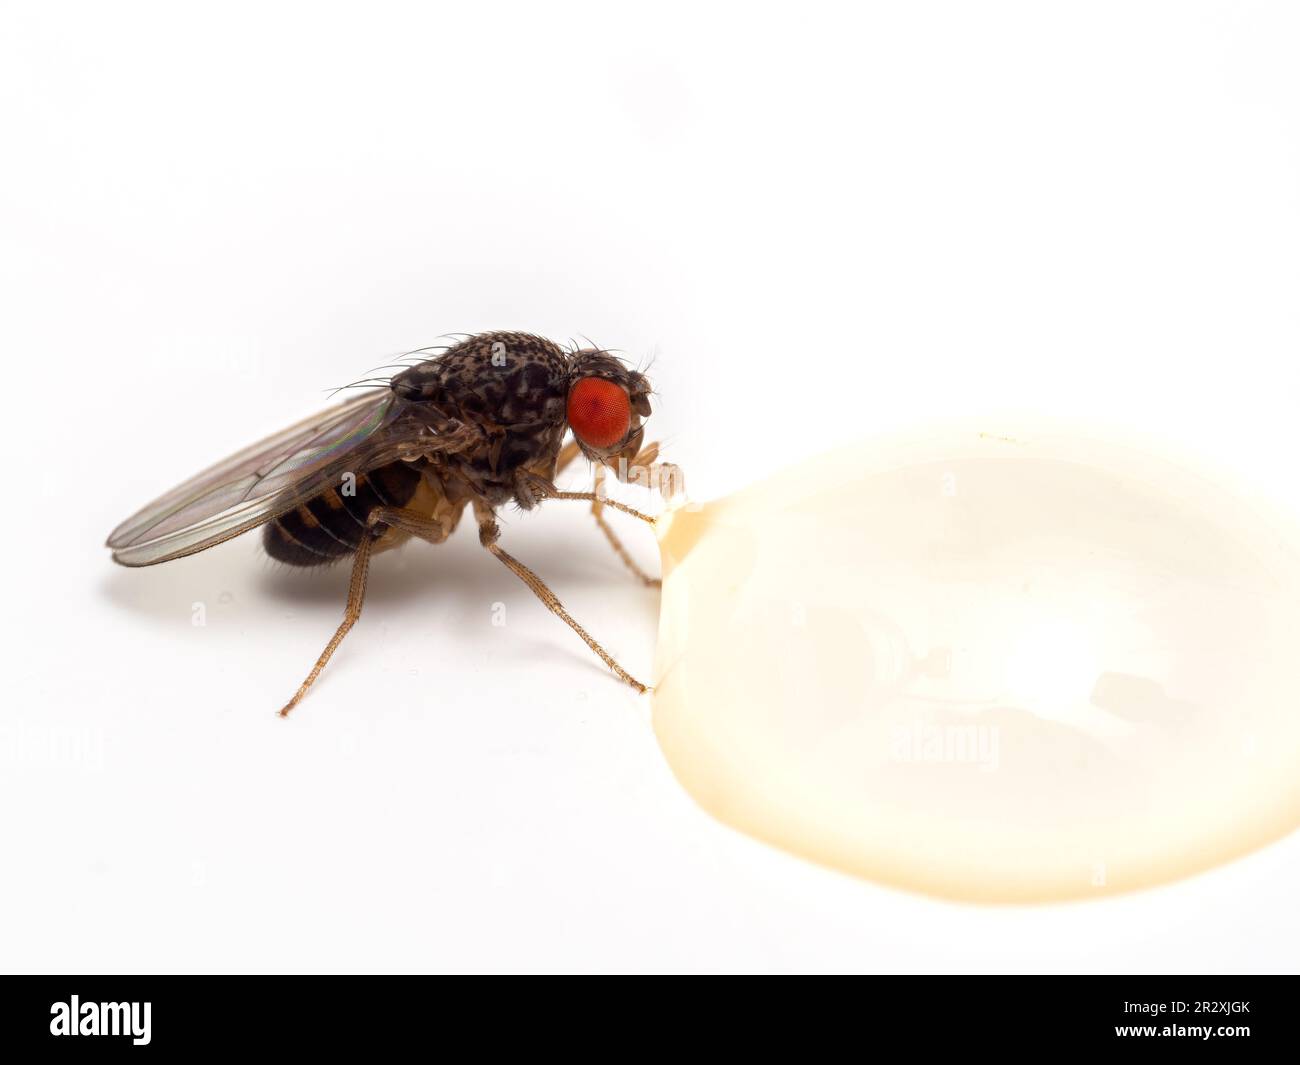 side view of a fruit fly (Drosophila hydei) with bright red eyes, drinking from a drop of honey, isolated on white Stock Photo